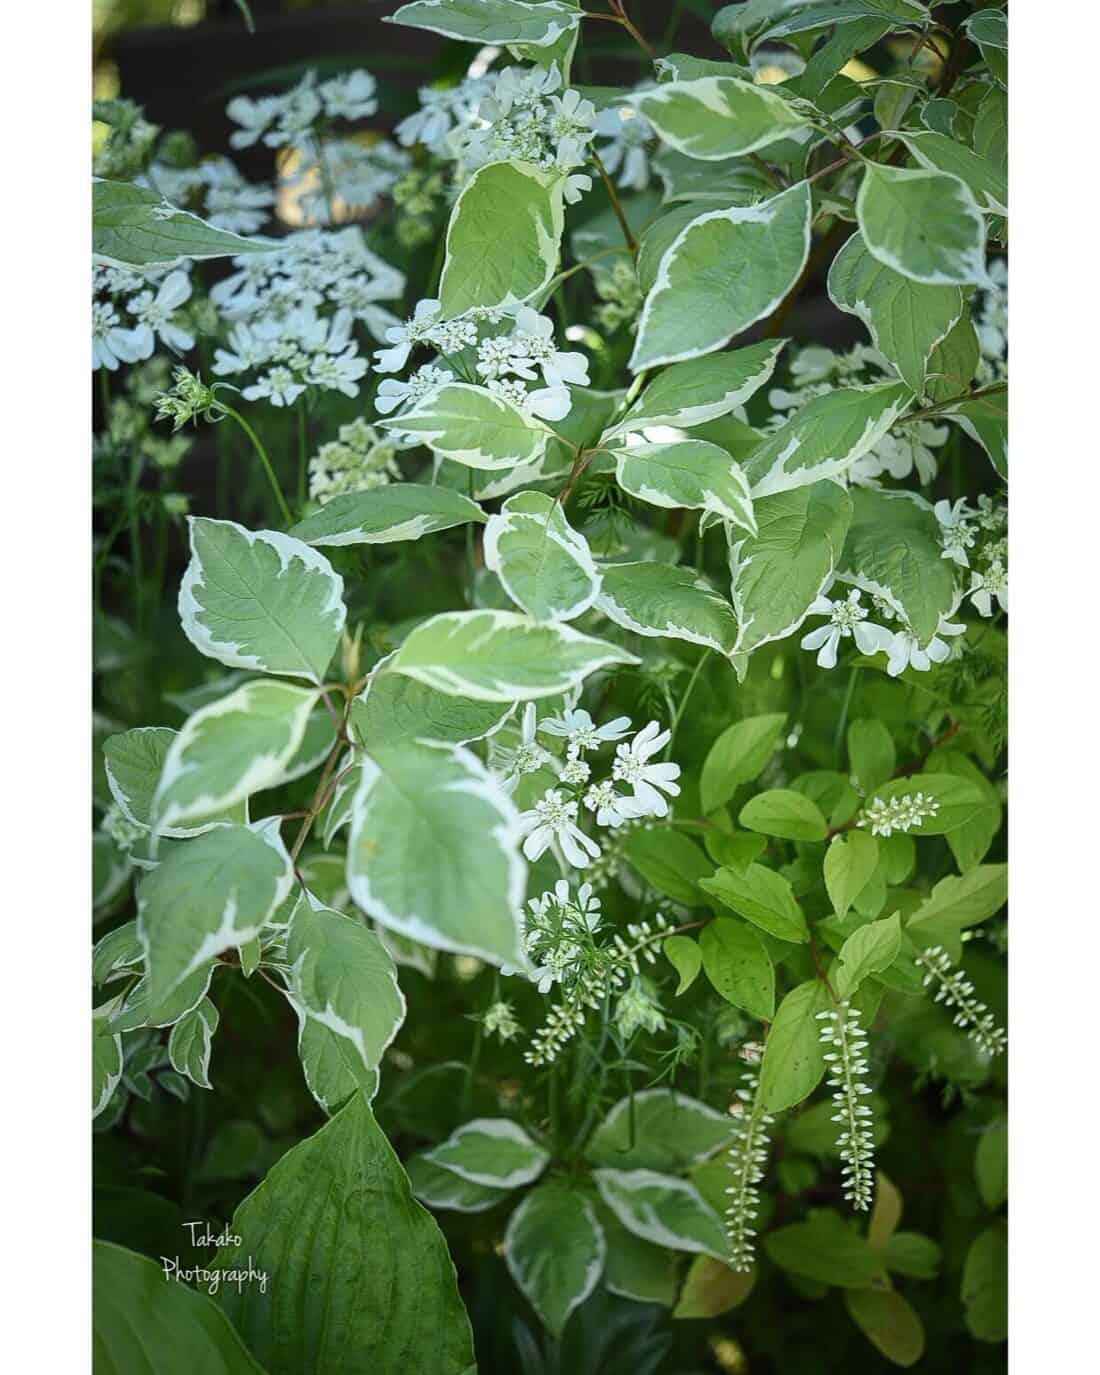 A lush garden scene featuring variegated leaves with white and green patterns, accompanied by small white blooms and hanging green flower buds from a Sweetspire 'Itea Little Henry', all highlighted by soft sunlight.